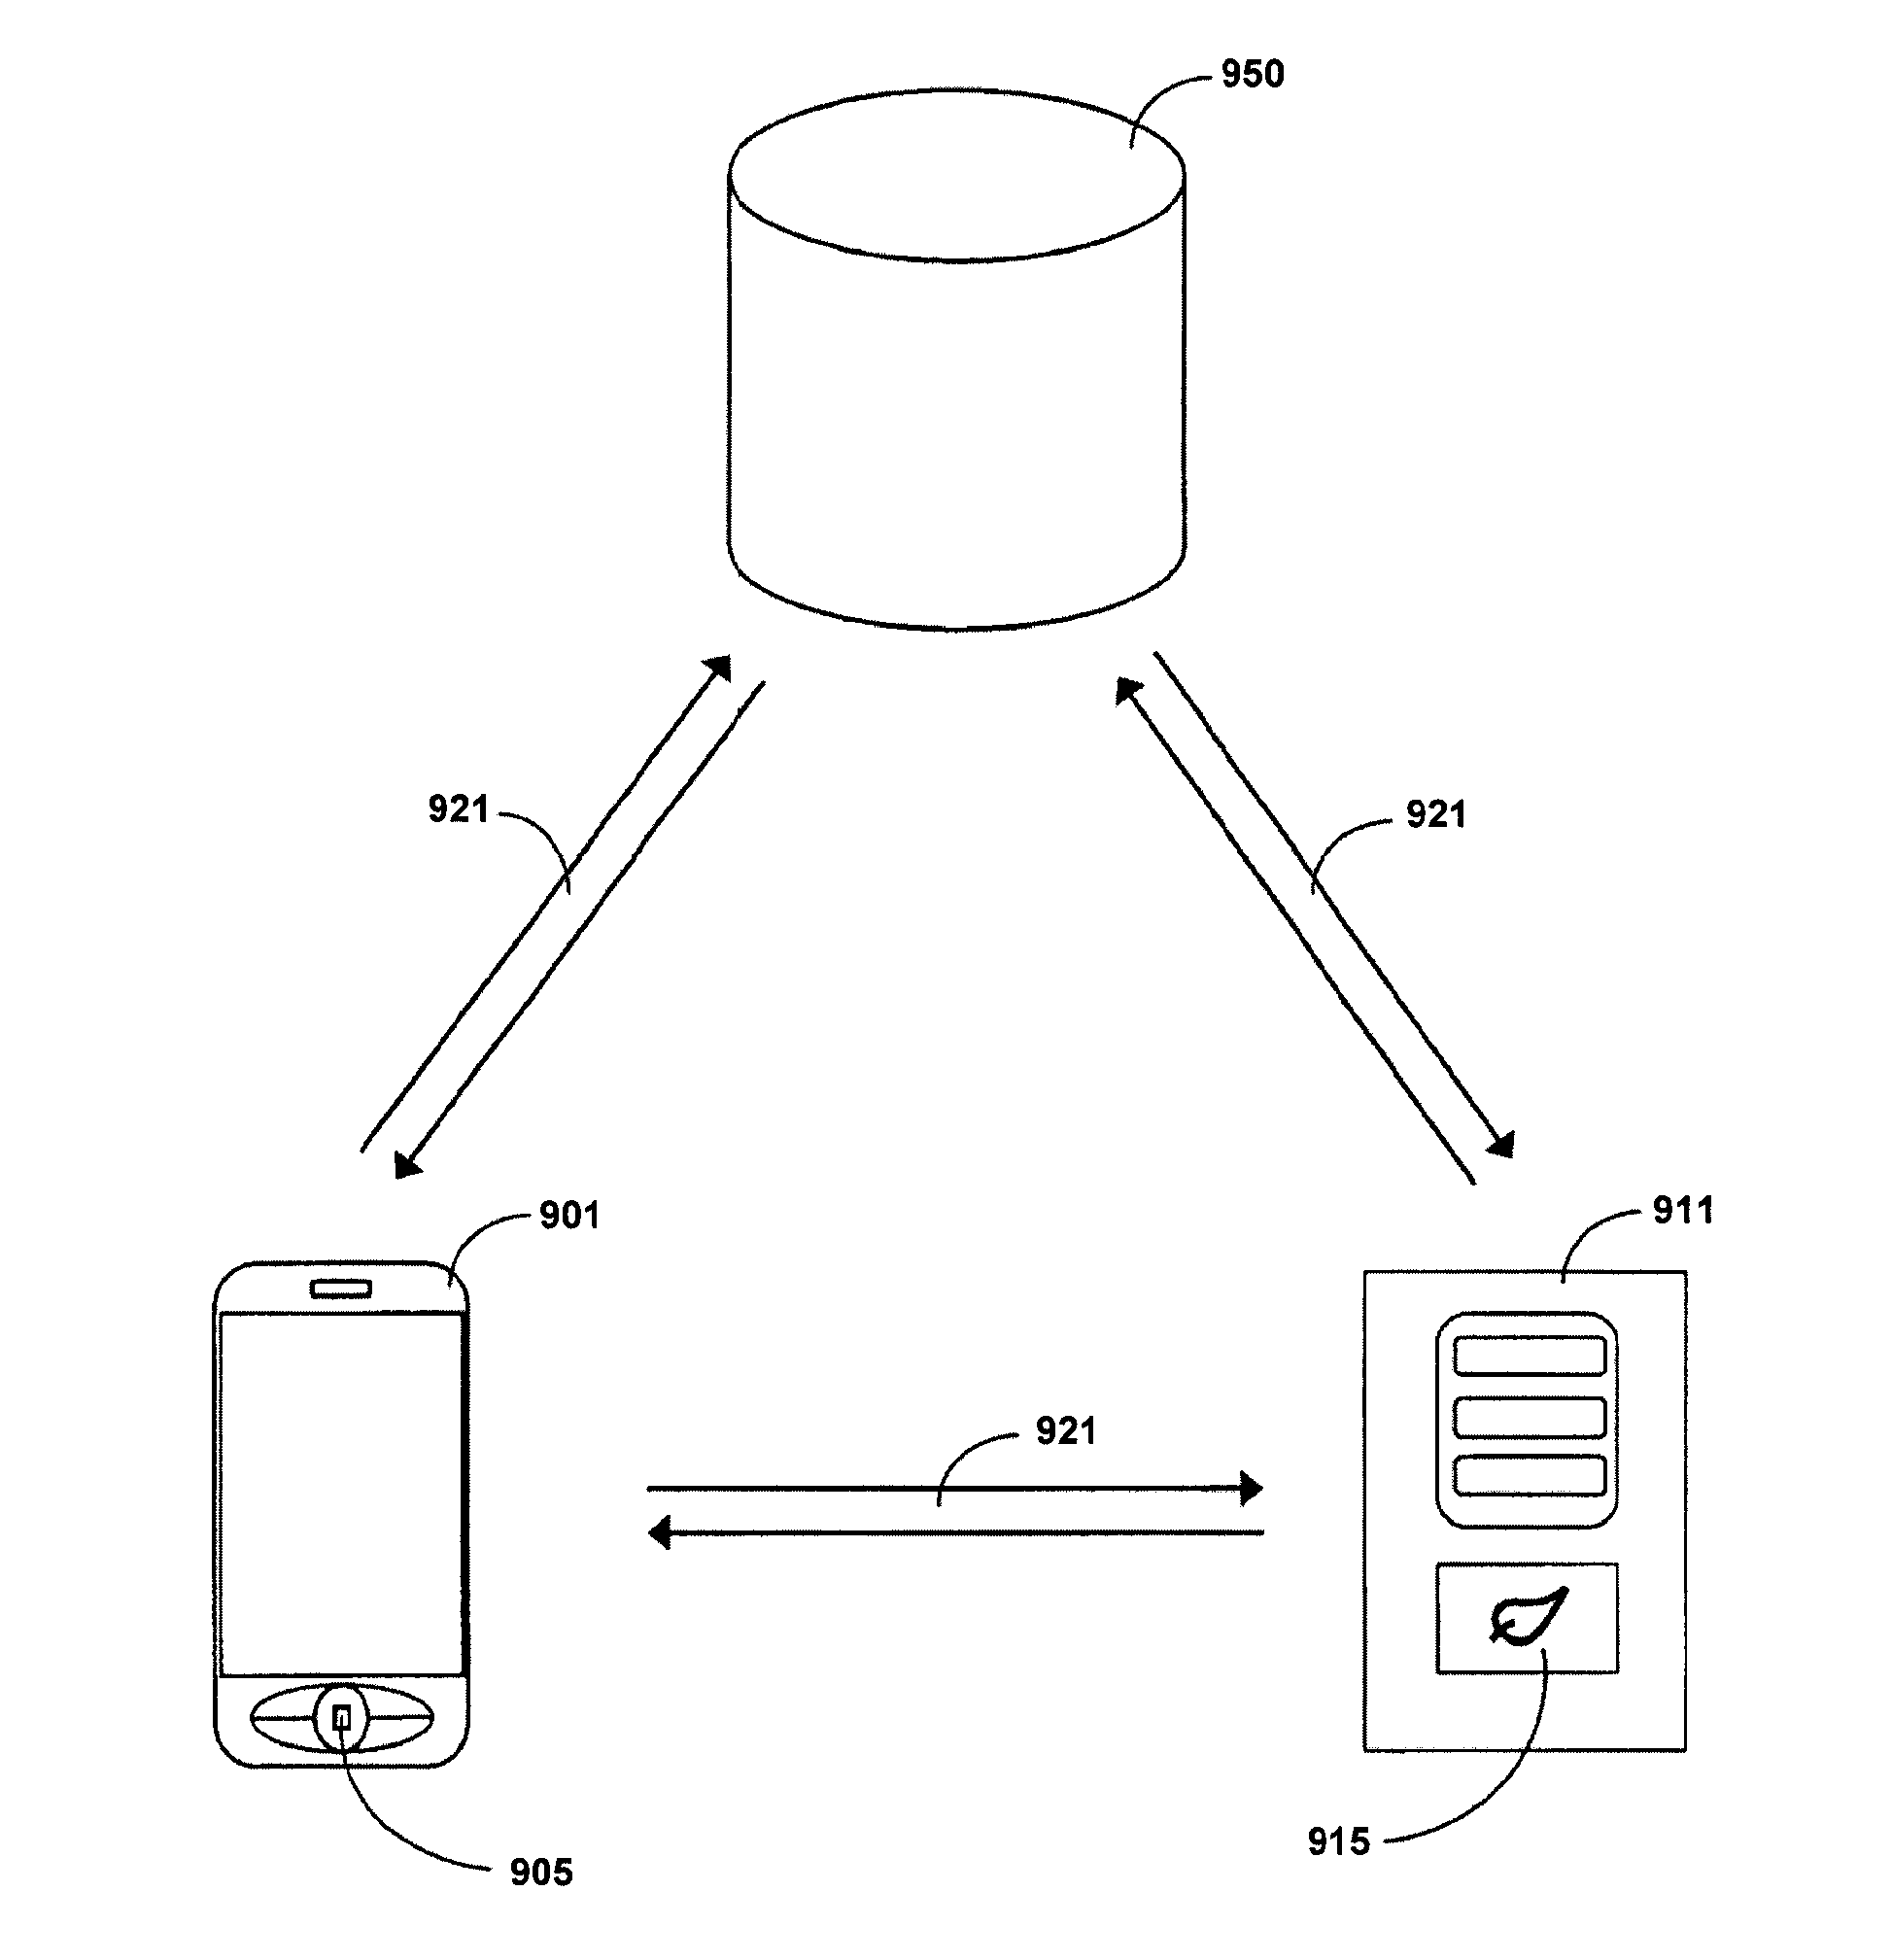 Methods and systems for sharing risk responses between collections of mobile communications devices